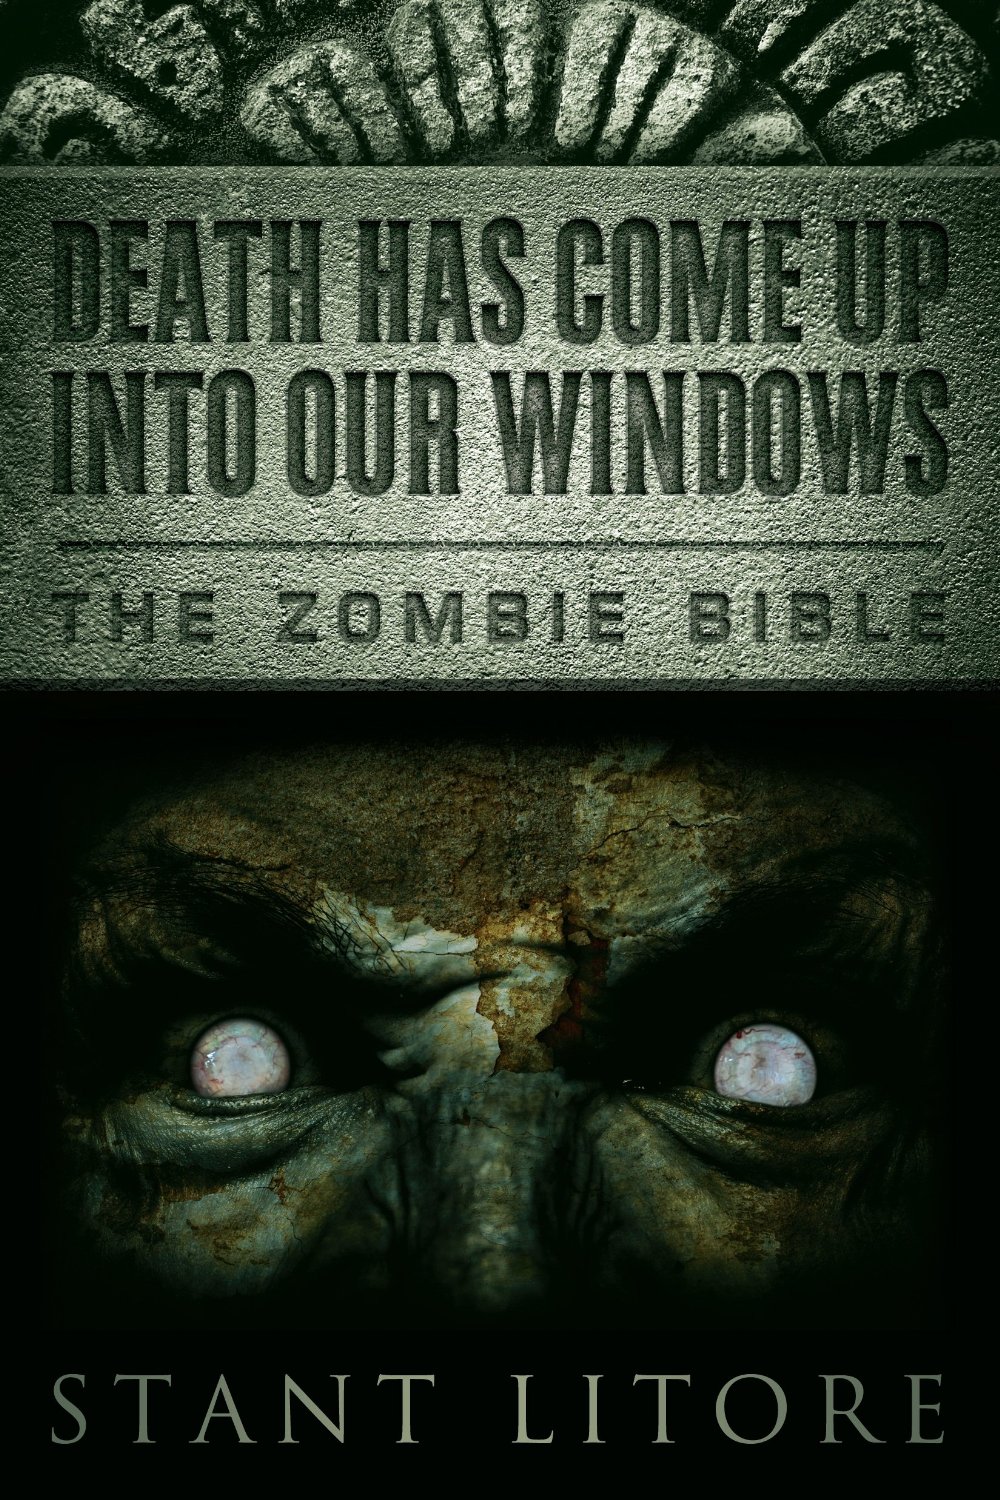 Death Has Come Up into Our Windows by Stant Litore